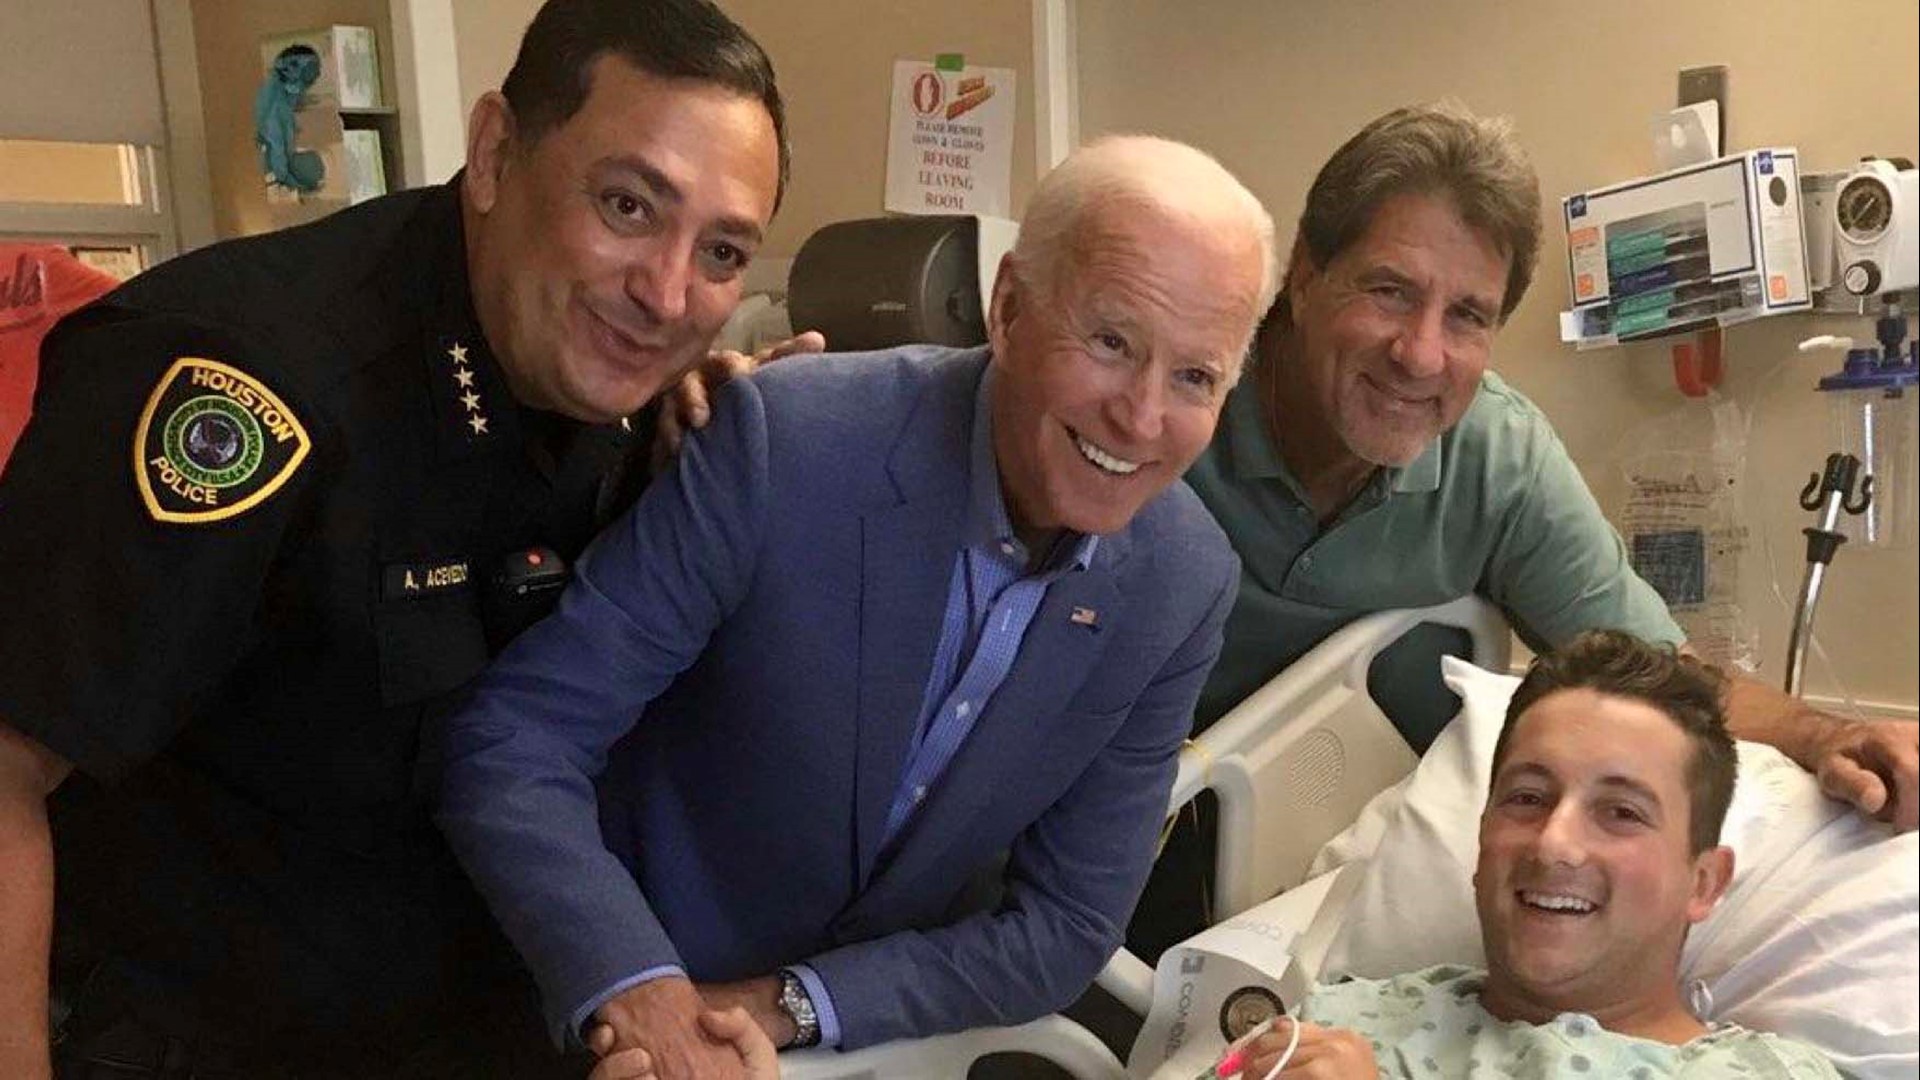 Even though Biden was in the middle of a campaign, he didn’t want publicity about his trip to see wounded Houston Police Officer Taylor Roccaforte.